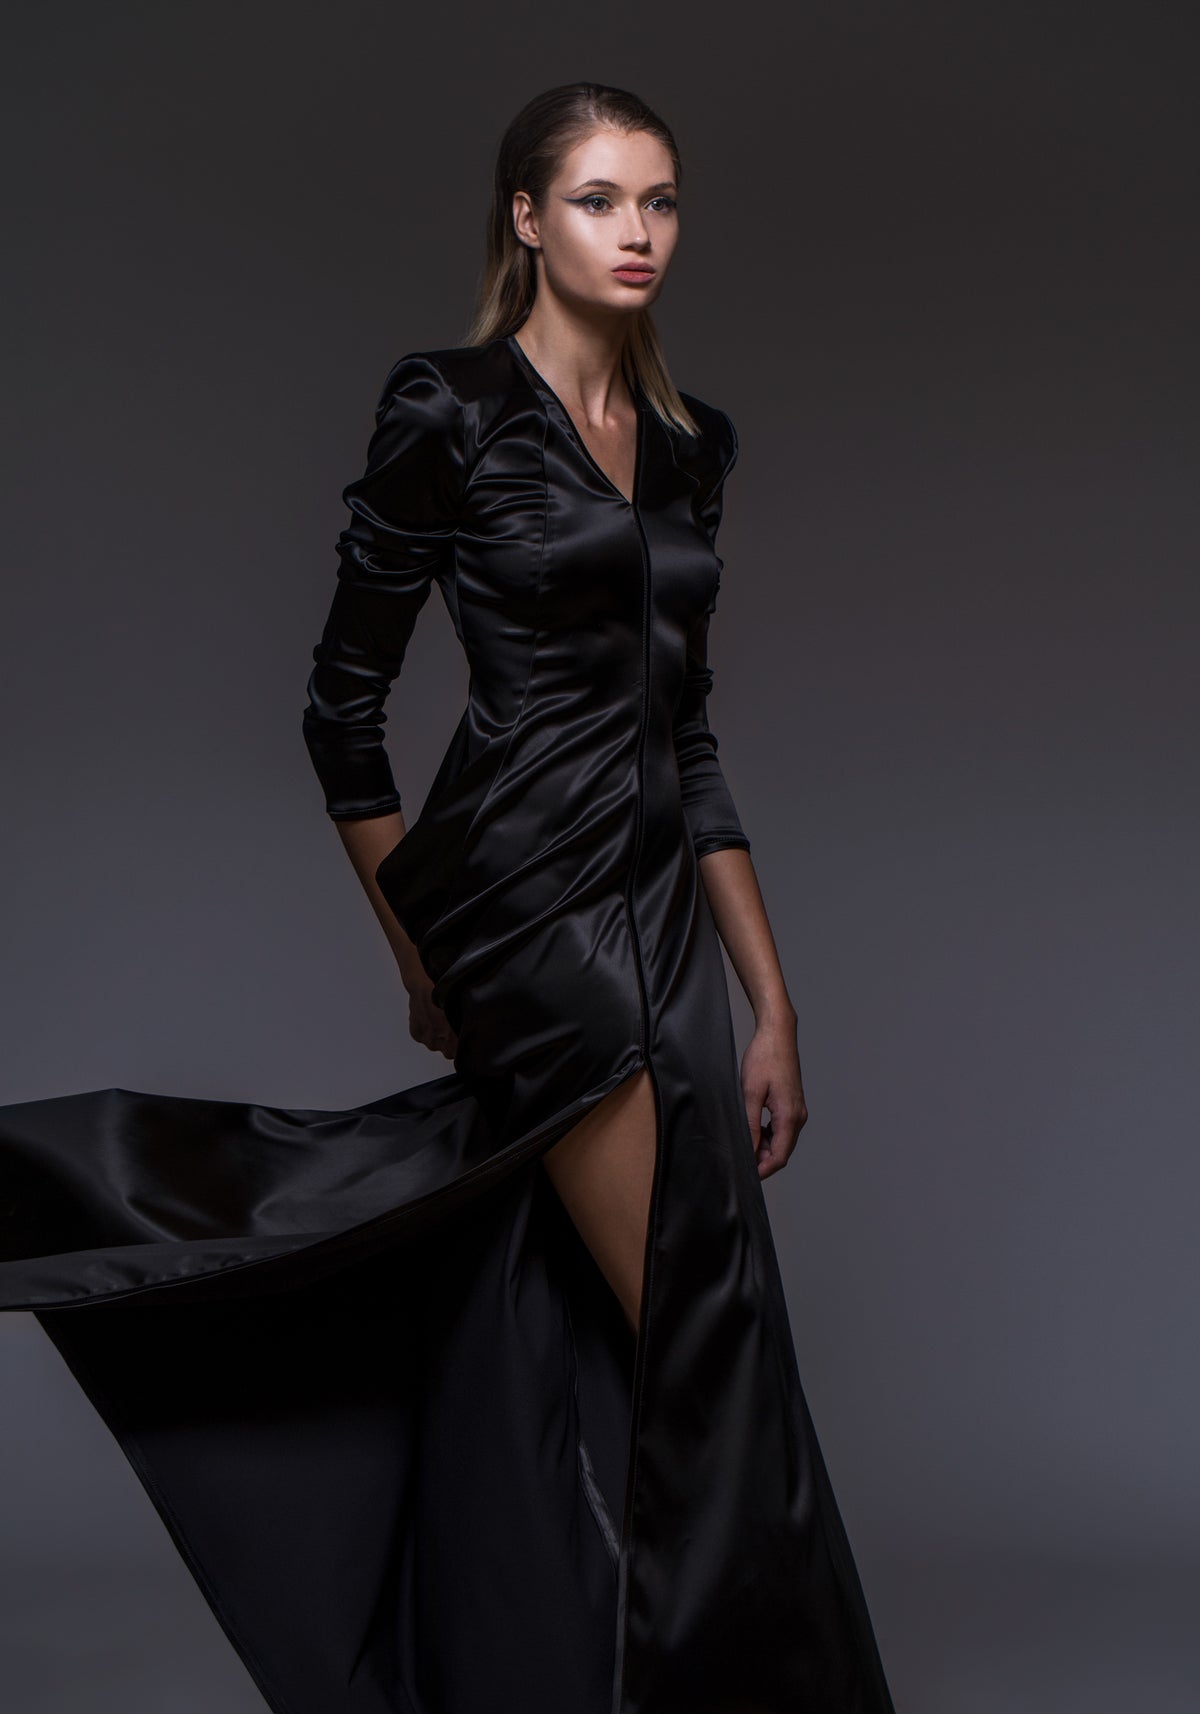 Margaux Satin Party Gown